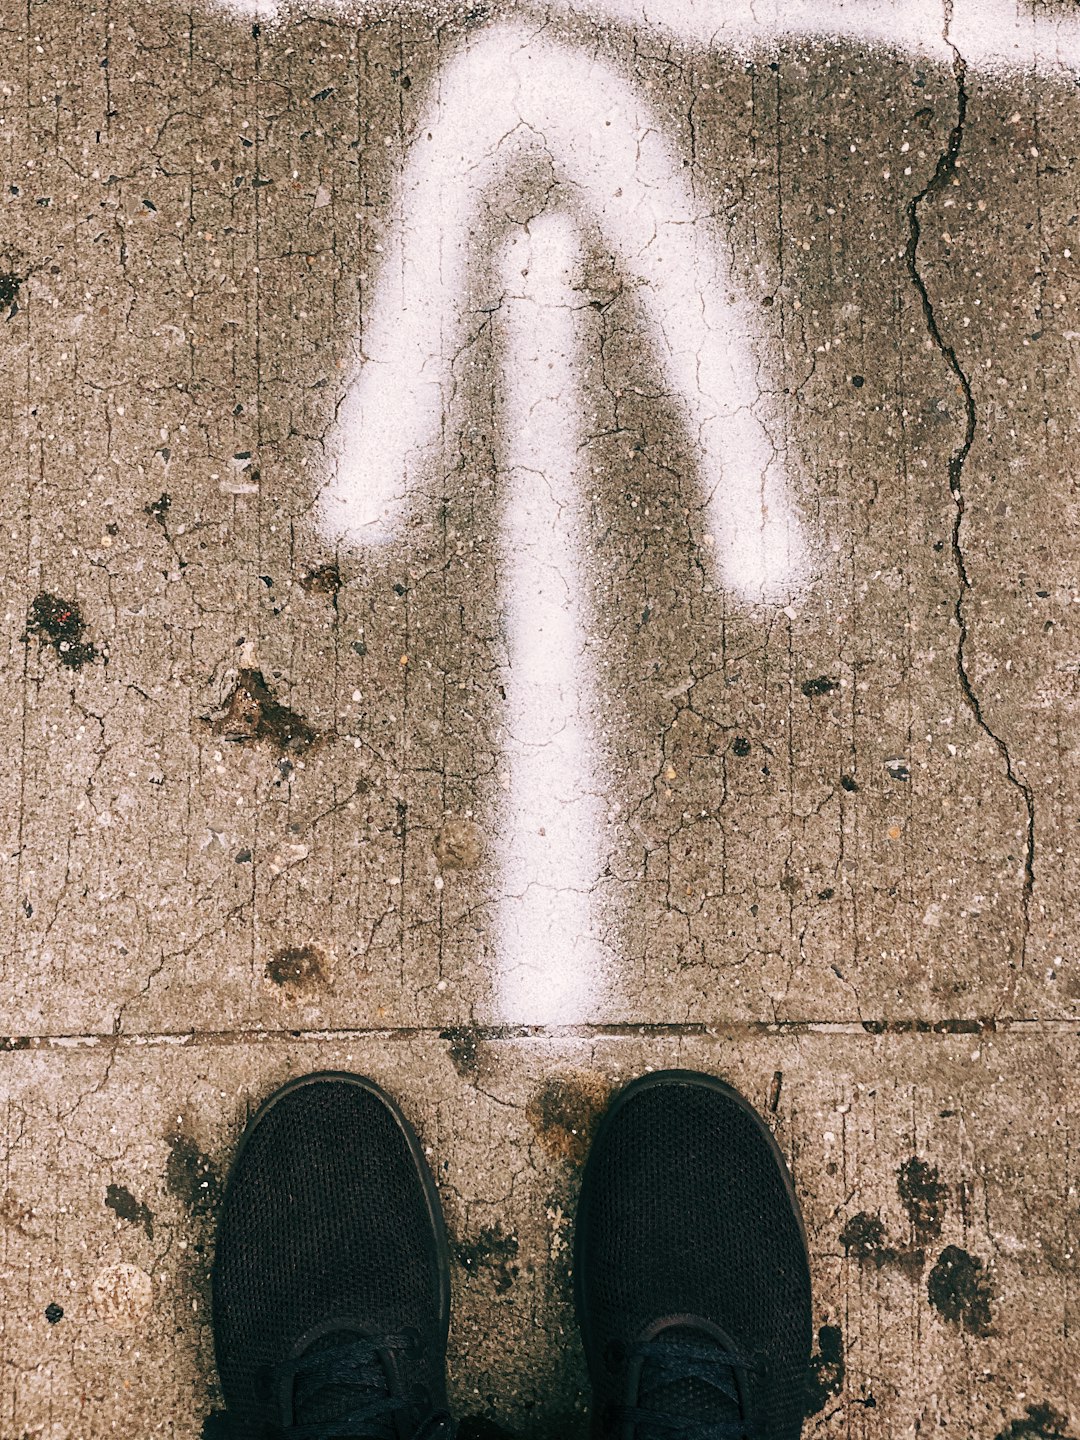 person wearing black shoes standing on brown concrete floor